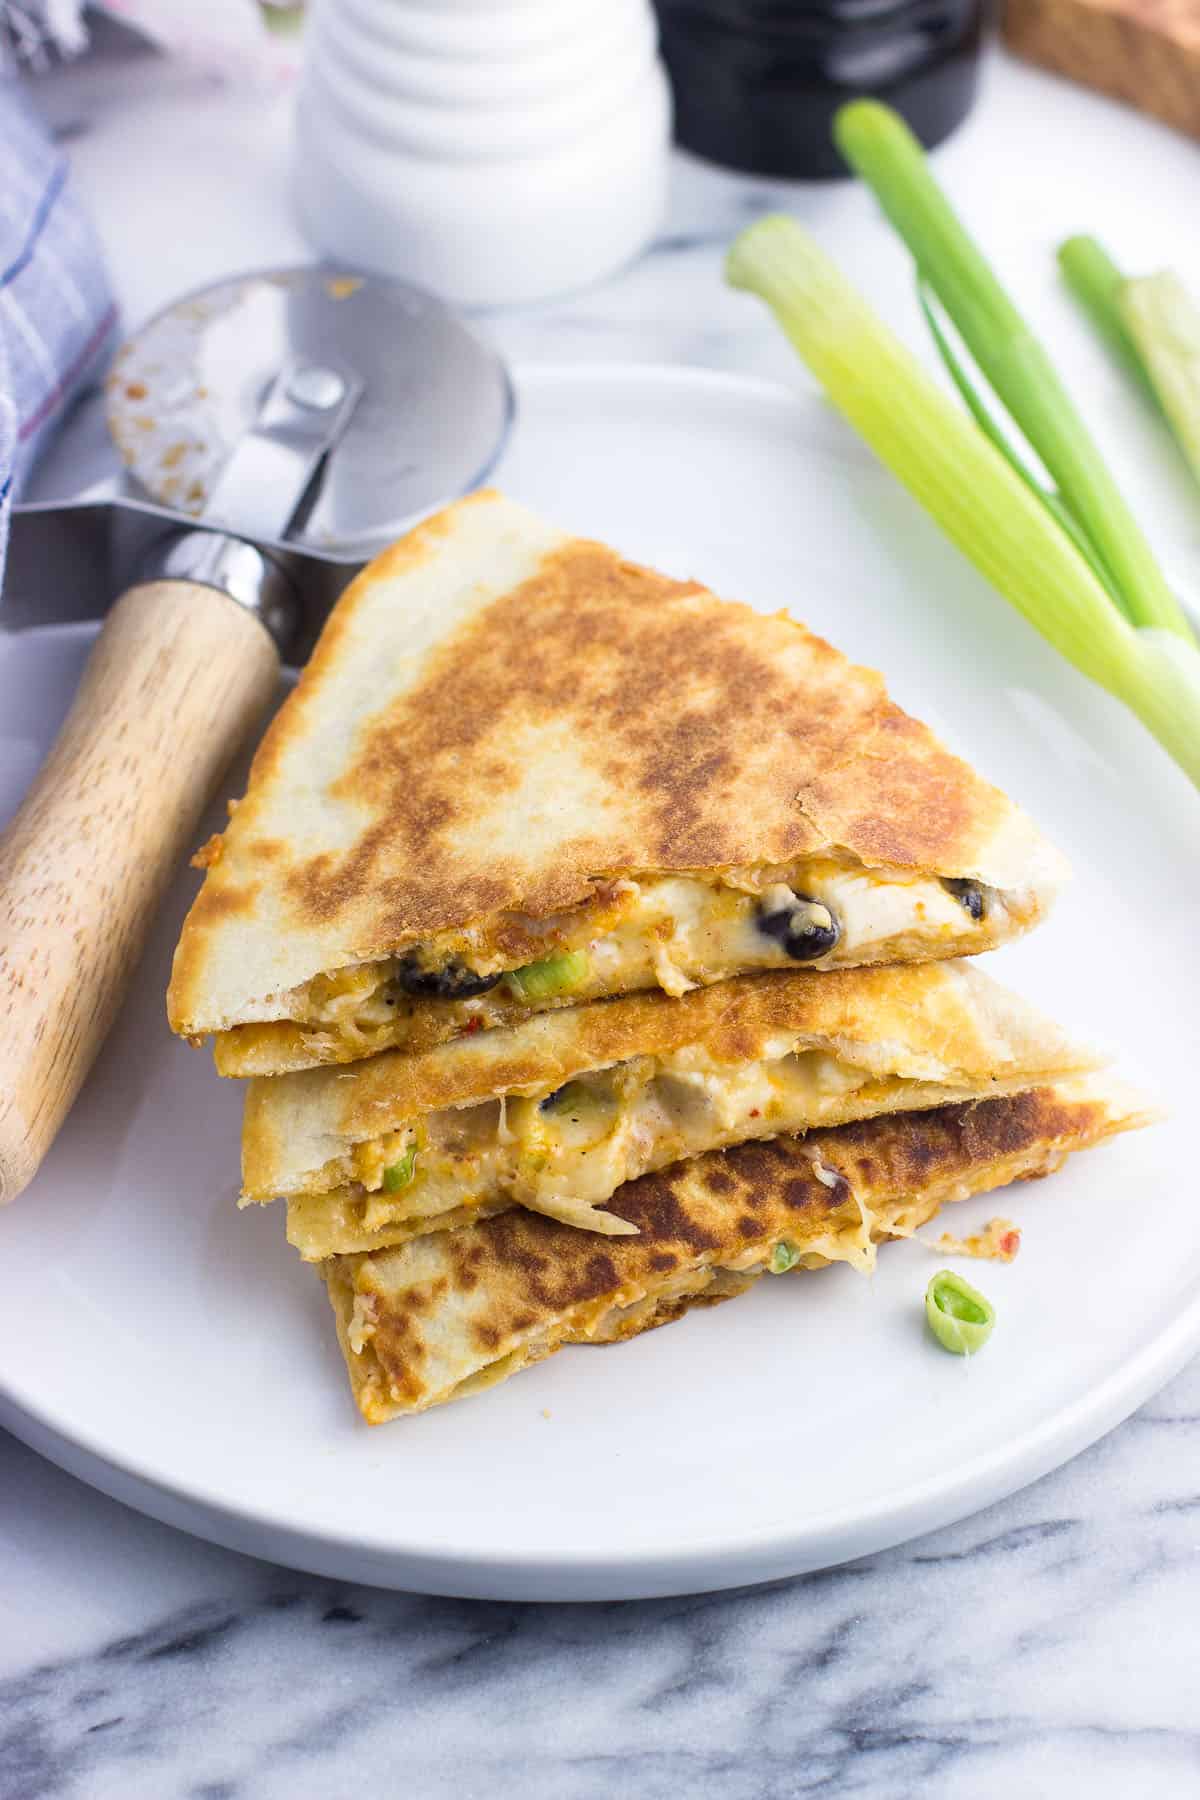 Three quesadilla wedges stacked on top of one another on an appetizer plate next to a pizza cutter and a bunch of green onions